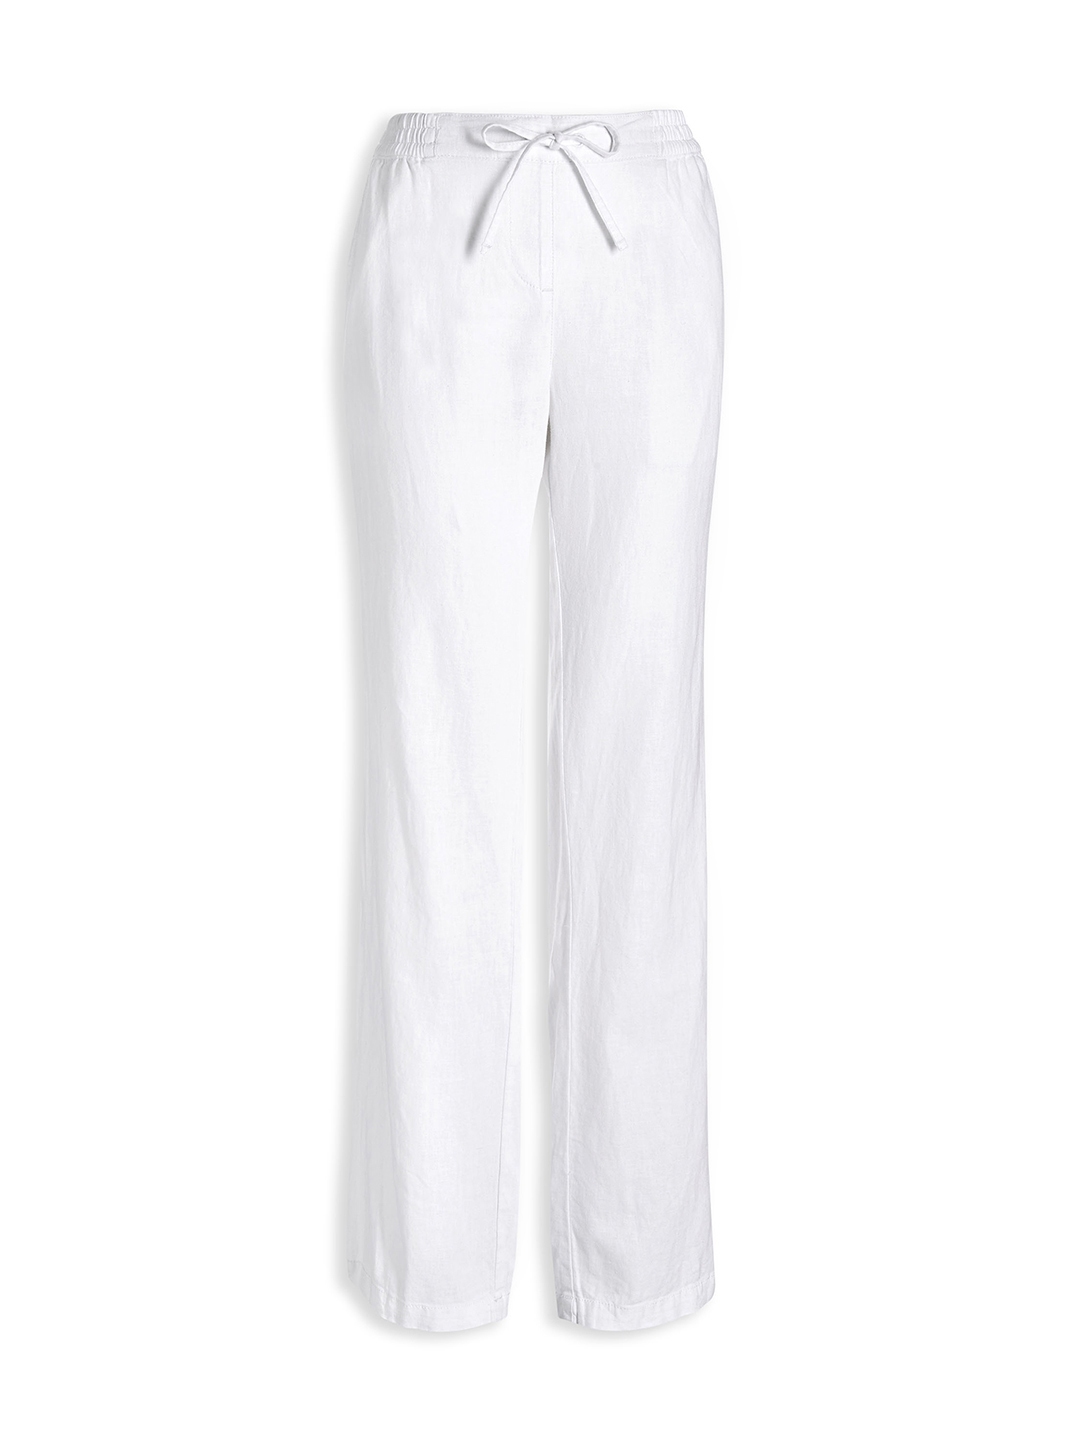 Buy Next Trousers online  Women  33 products  FASHIOLAin